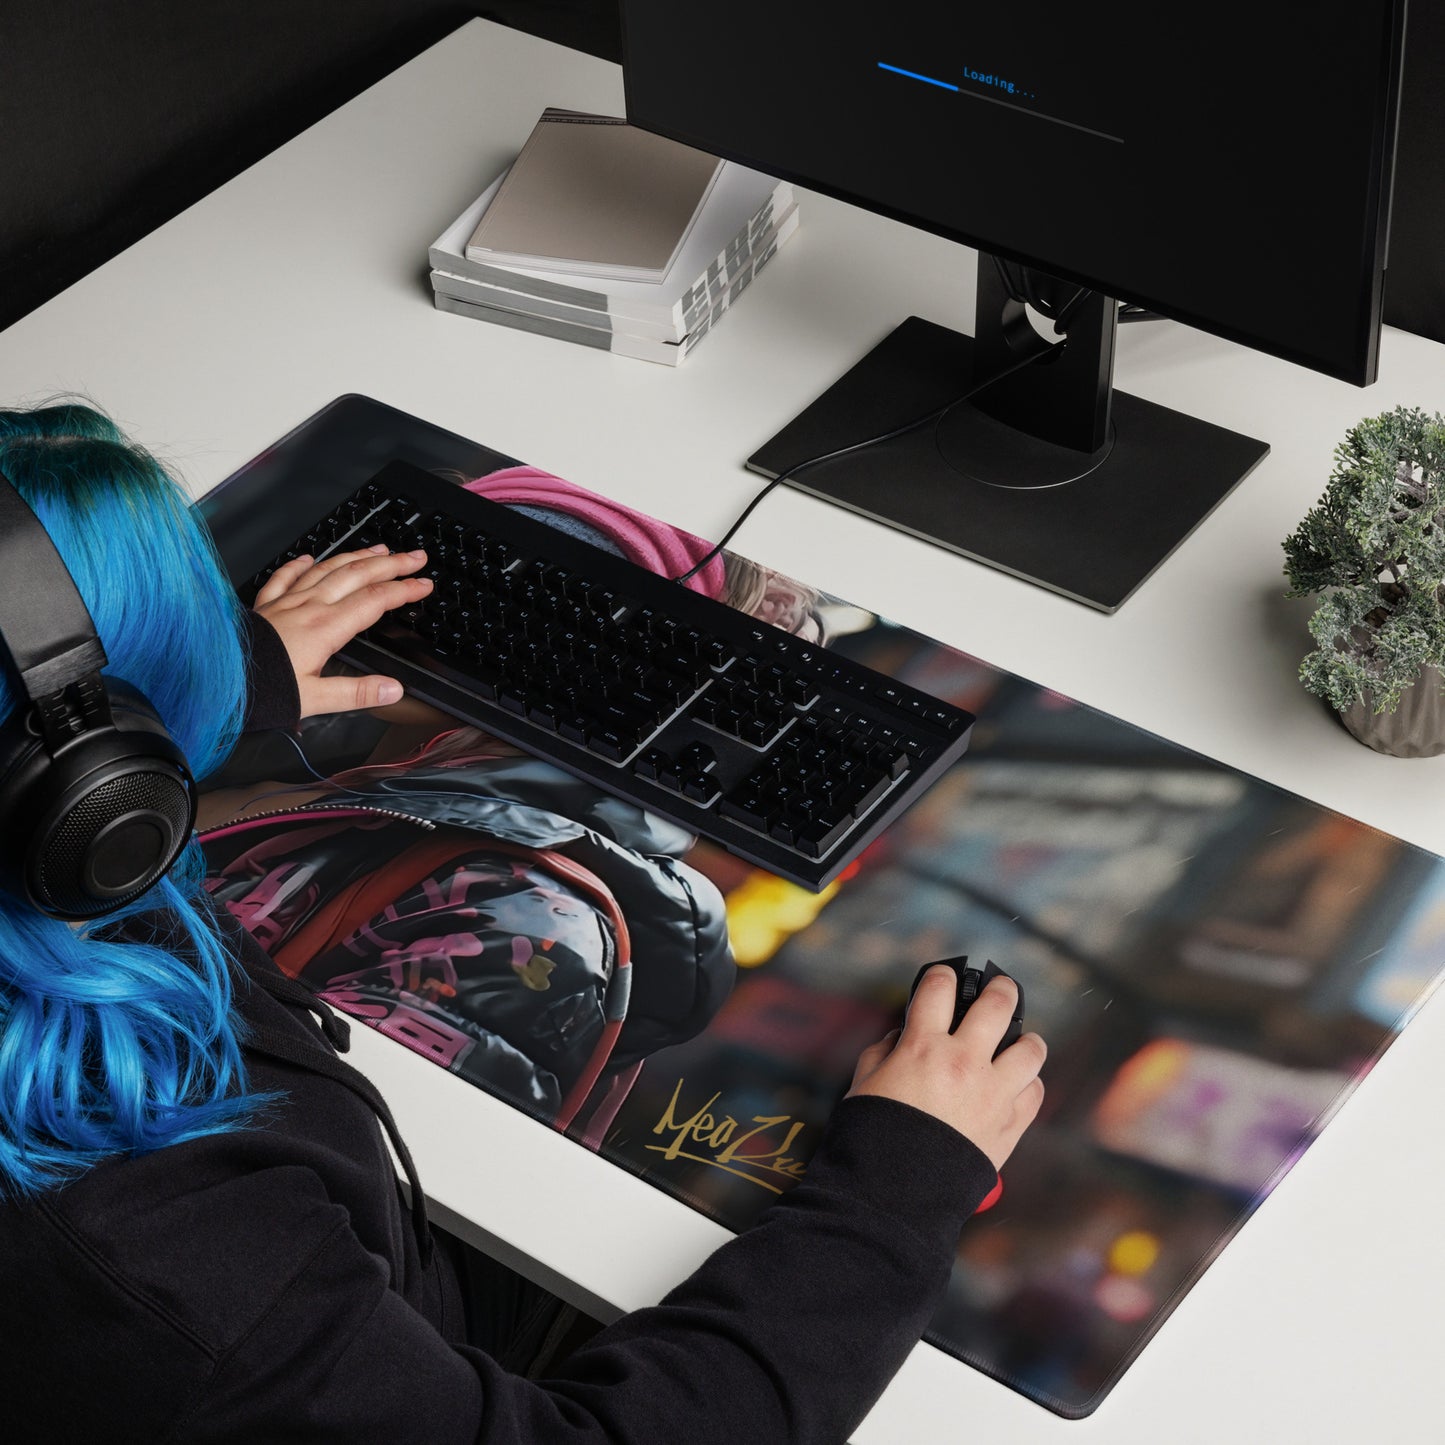 Dive into the details with a close-up of the "Future Girl" Gaming Mouse Pad in the second image. Witness the precision in every pixel of the design, as the mouse pad becomes a canvas for your gaming endeavors